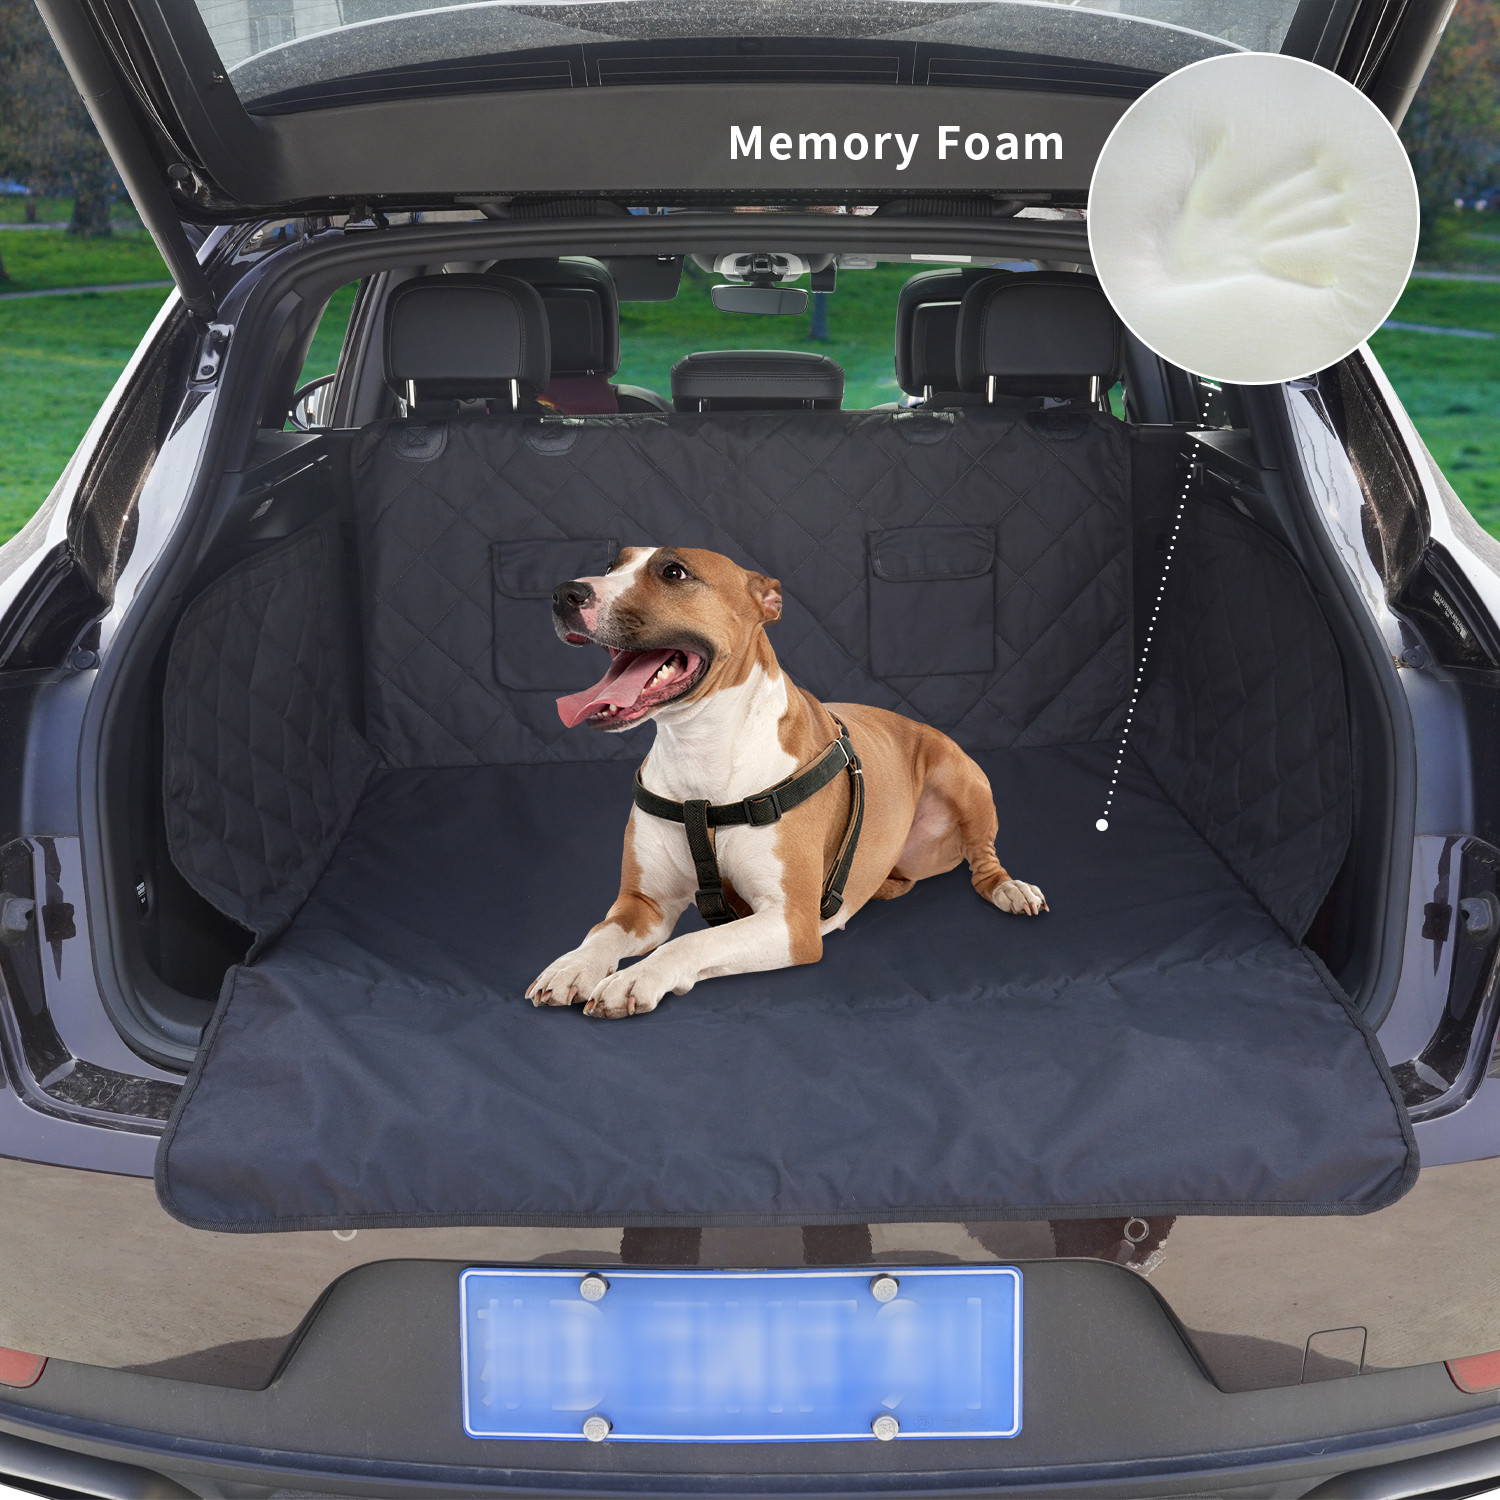  waterproof pet dog car cargo cover with soft memory foam 100% scratch and non-slip dog trunk seat cover for SUV Manufactures